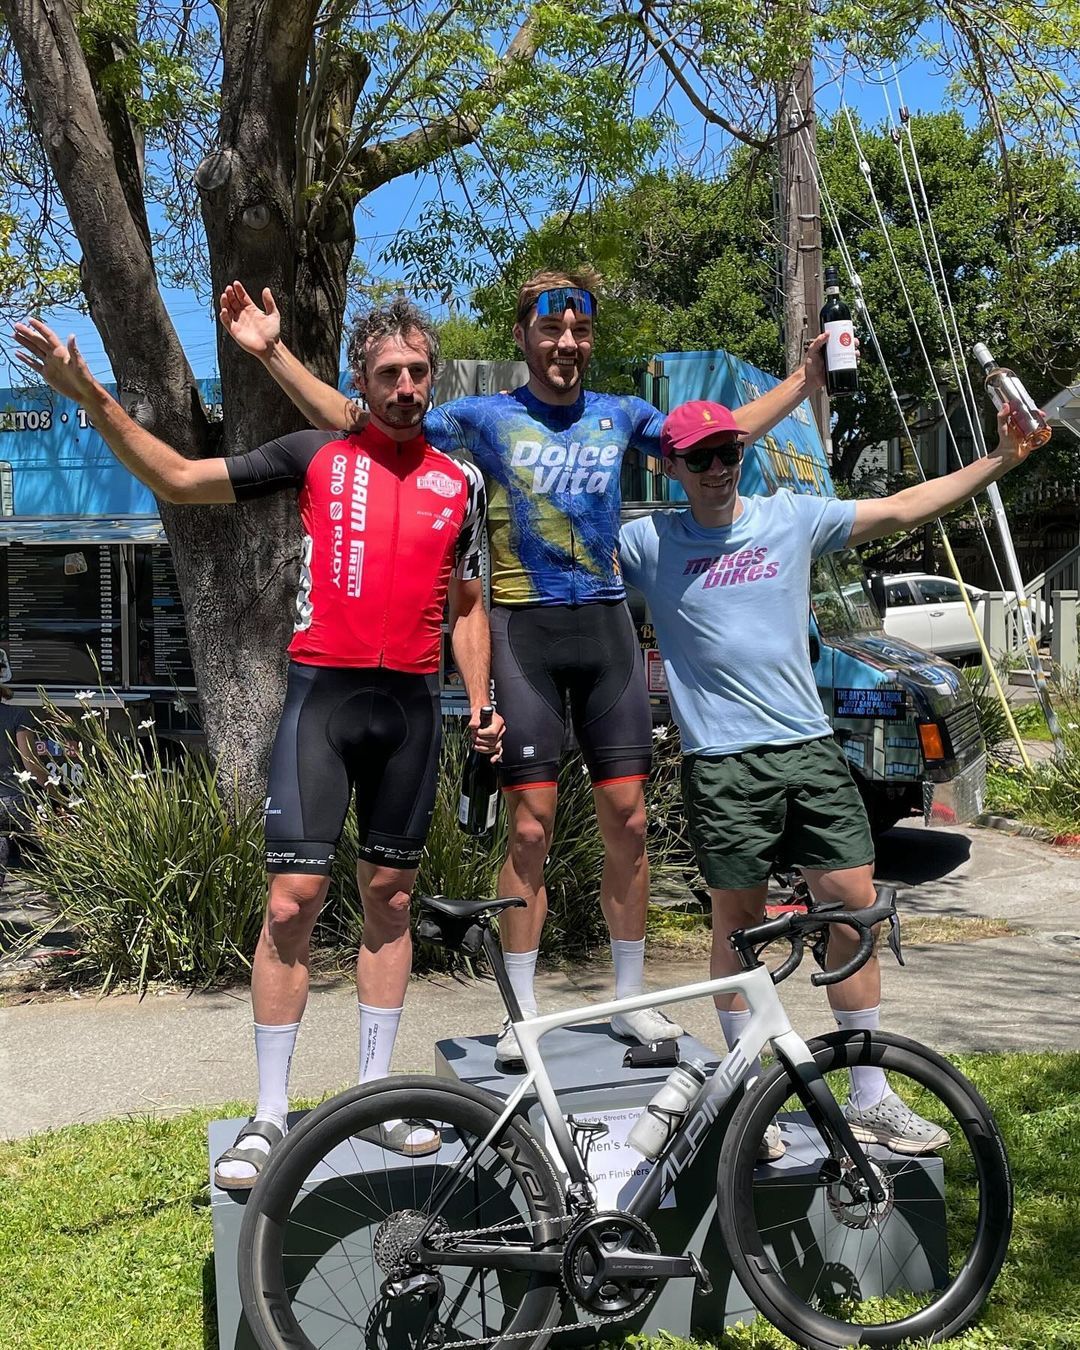 Wrapping up an awesome weekend put on by @berkeleybike at the #berkeleyomnium! The big winner for the weekend was @jacobeyj , taking 🥉in the #berkelyhillsroadrace, 🥇in the #berkeleystreetscriterium, and 🥇in the Omnium in the Elite 4 category! DVC walked away with another 🥇over the weekend in the 35+ 3/4 field with @pier_diprima taking top honors in the criterium. A new “Italian Stallion” in the making? 🤣 Also in the 35+ 3/4 field, the inaugural member of the DVC Colombian contingent @germanandresz wrapped up 🥉 in the Omnium after placing 7th in both the road race and criterium. Consistency pays off! Finally, the man, the myth, the master of data privacy - Gabe P. taking a well deserved 🥈in the 35+ 123 field after towing a 3 man break for the bulk of the race! Amazing job everyone! On to the next weekend!

@sportful @sfitalianathleticclub @equatorcoffees @poggio_labs @achieveptc @tripsforkidsmarin @sage.realestategroup @marinservicecourse @jkbrkb  #onewealthadvisors